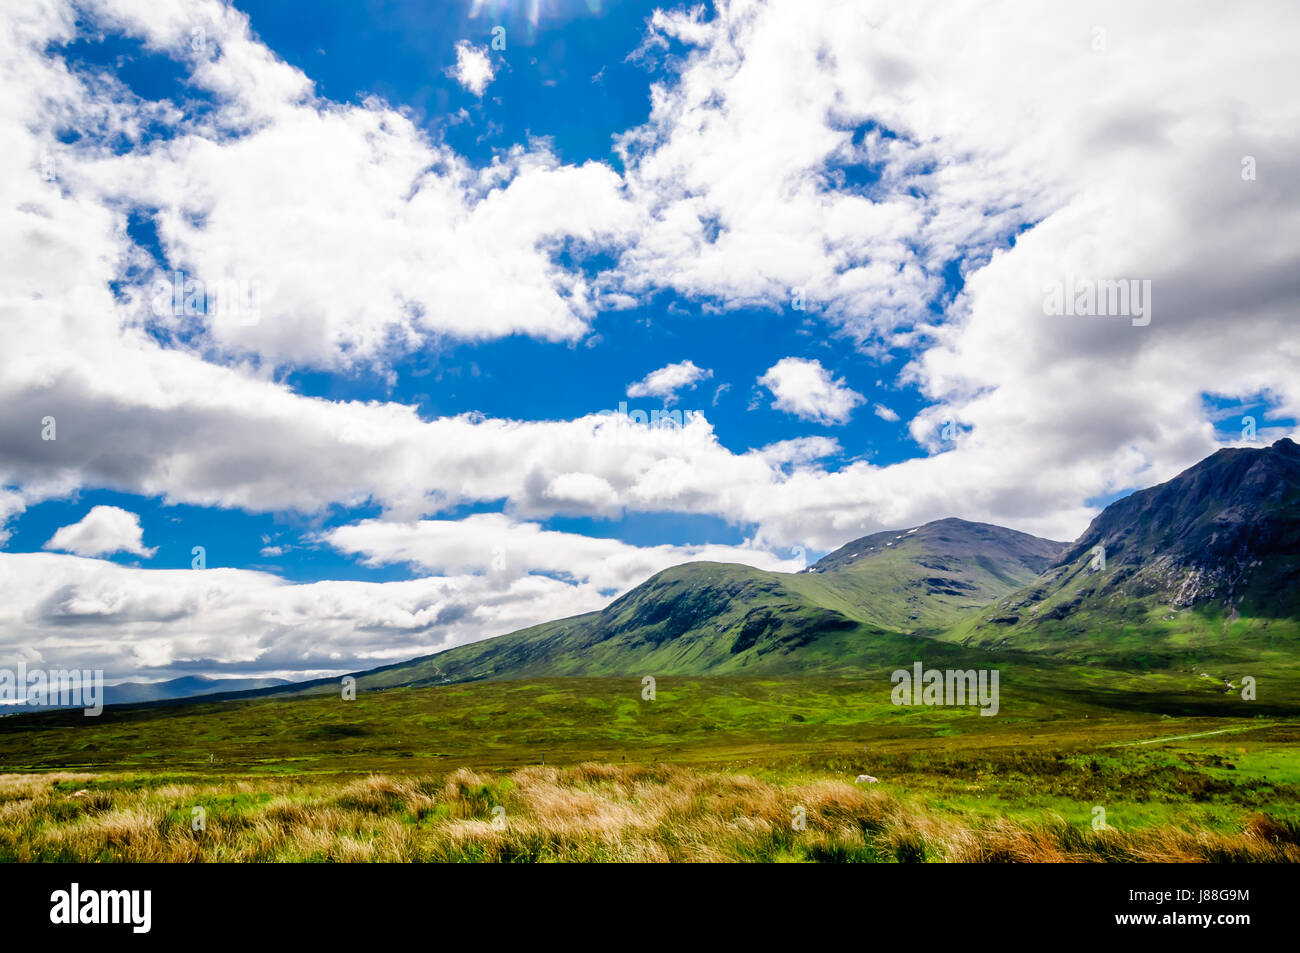 View on Highlands and meadows landscape in Scotland Stock Photo